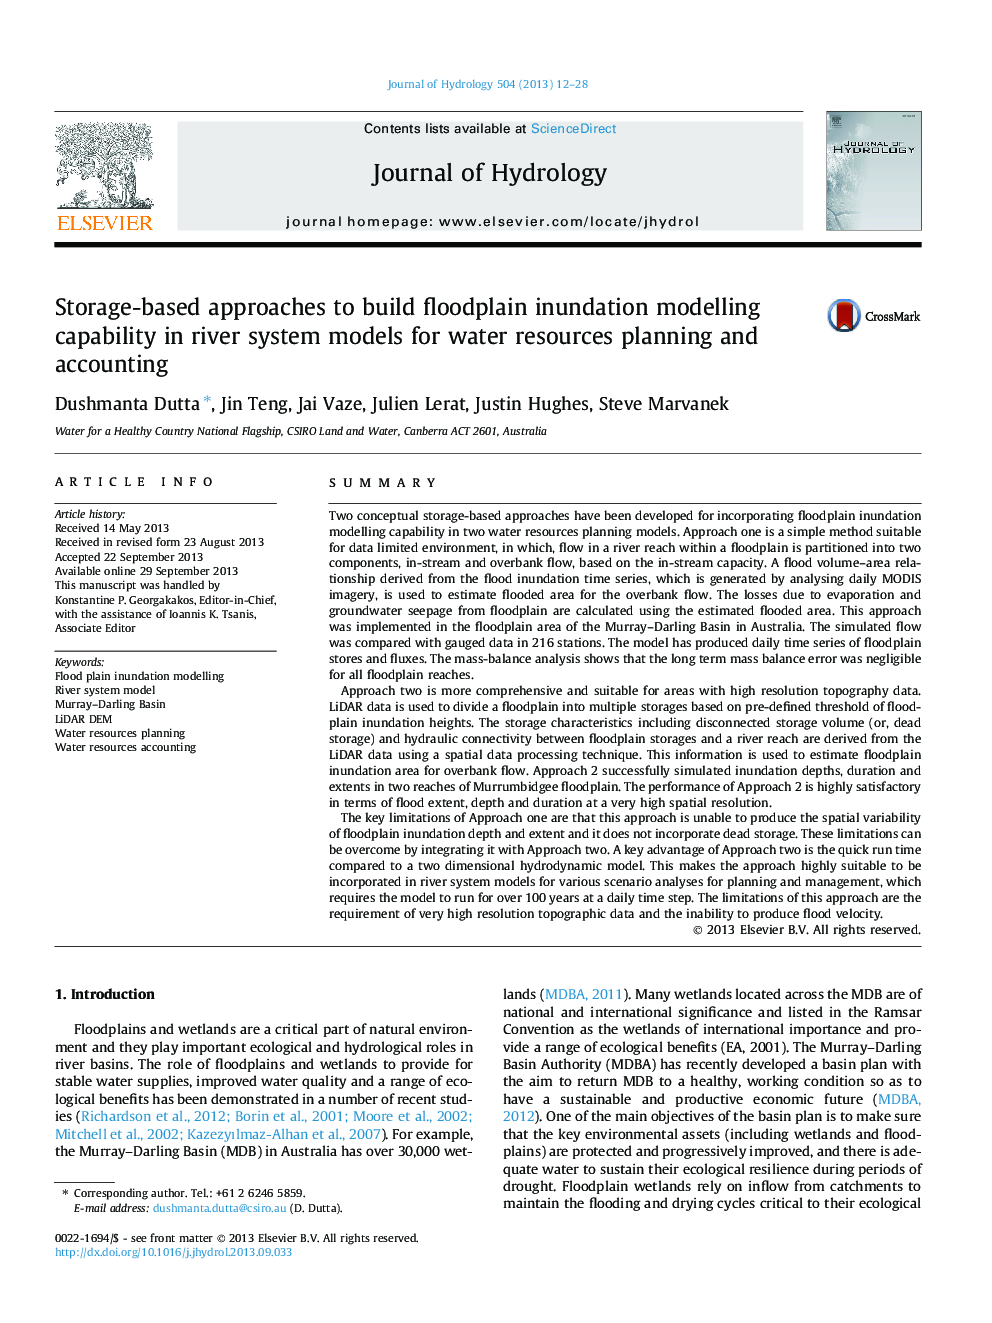 Storage-based approaches to build floodplain inundation modelling capability in river system models for water resources planning and accounting